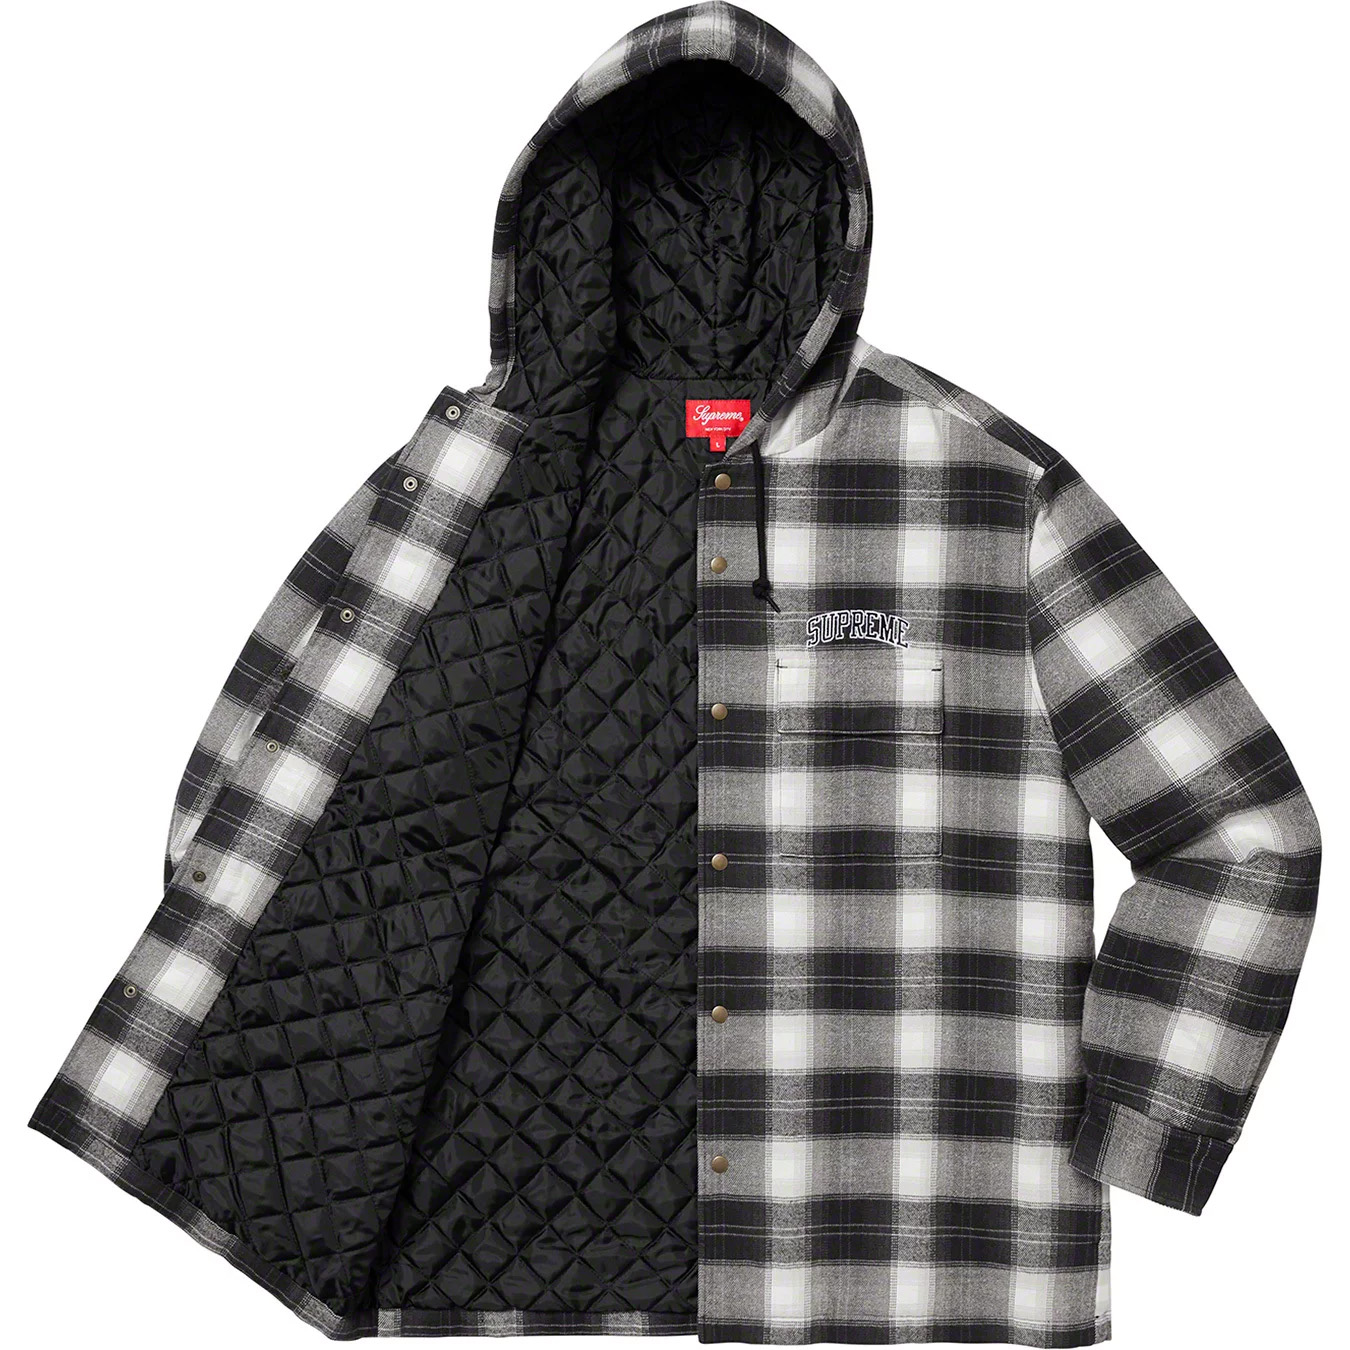 Supreme Quilted Hooded Plaid Shirt